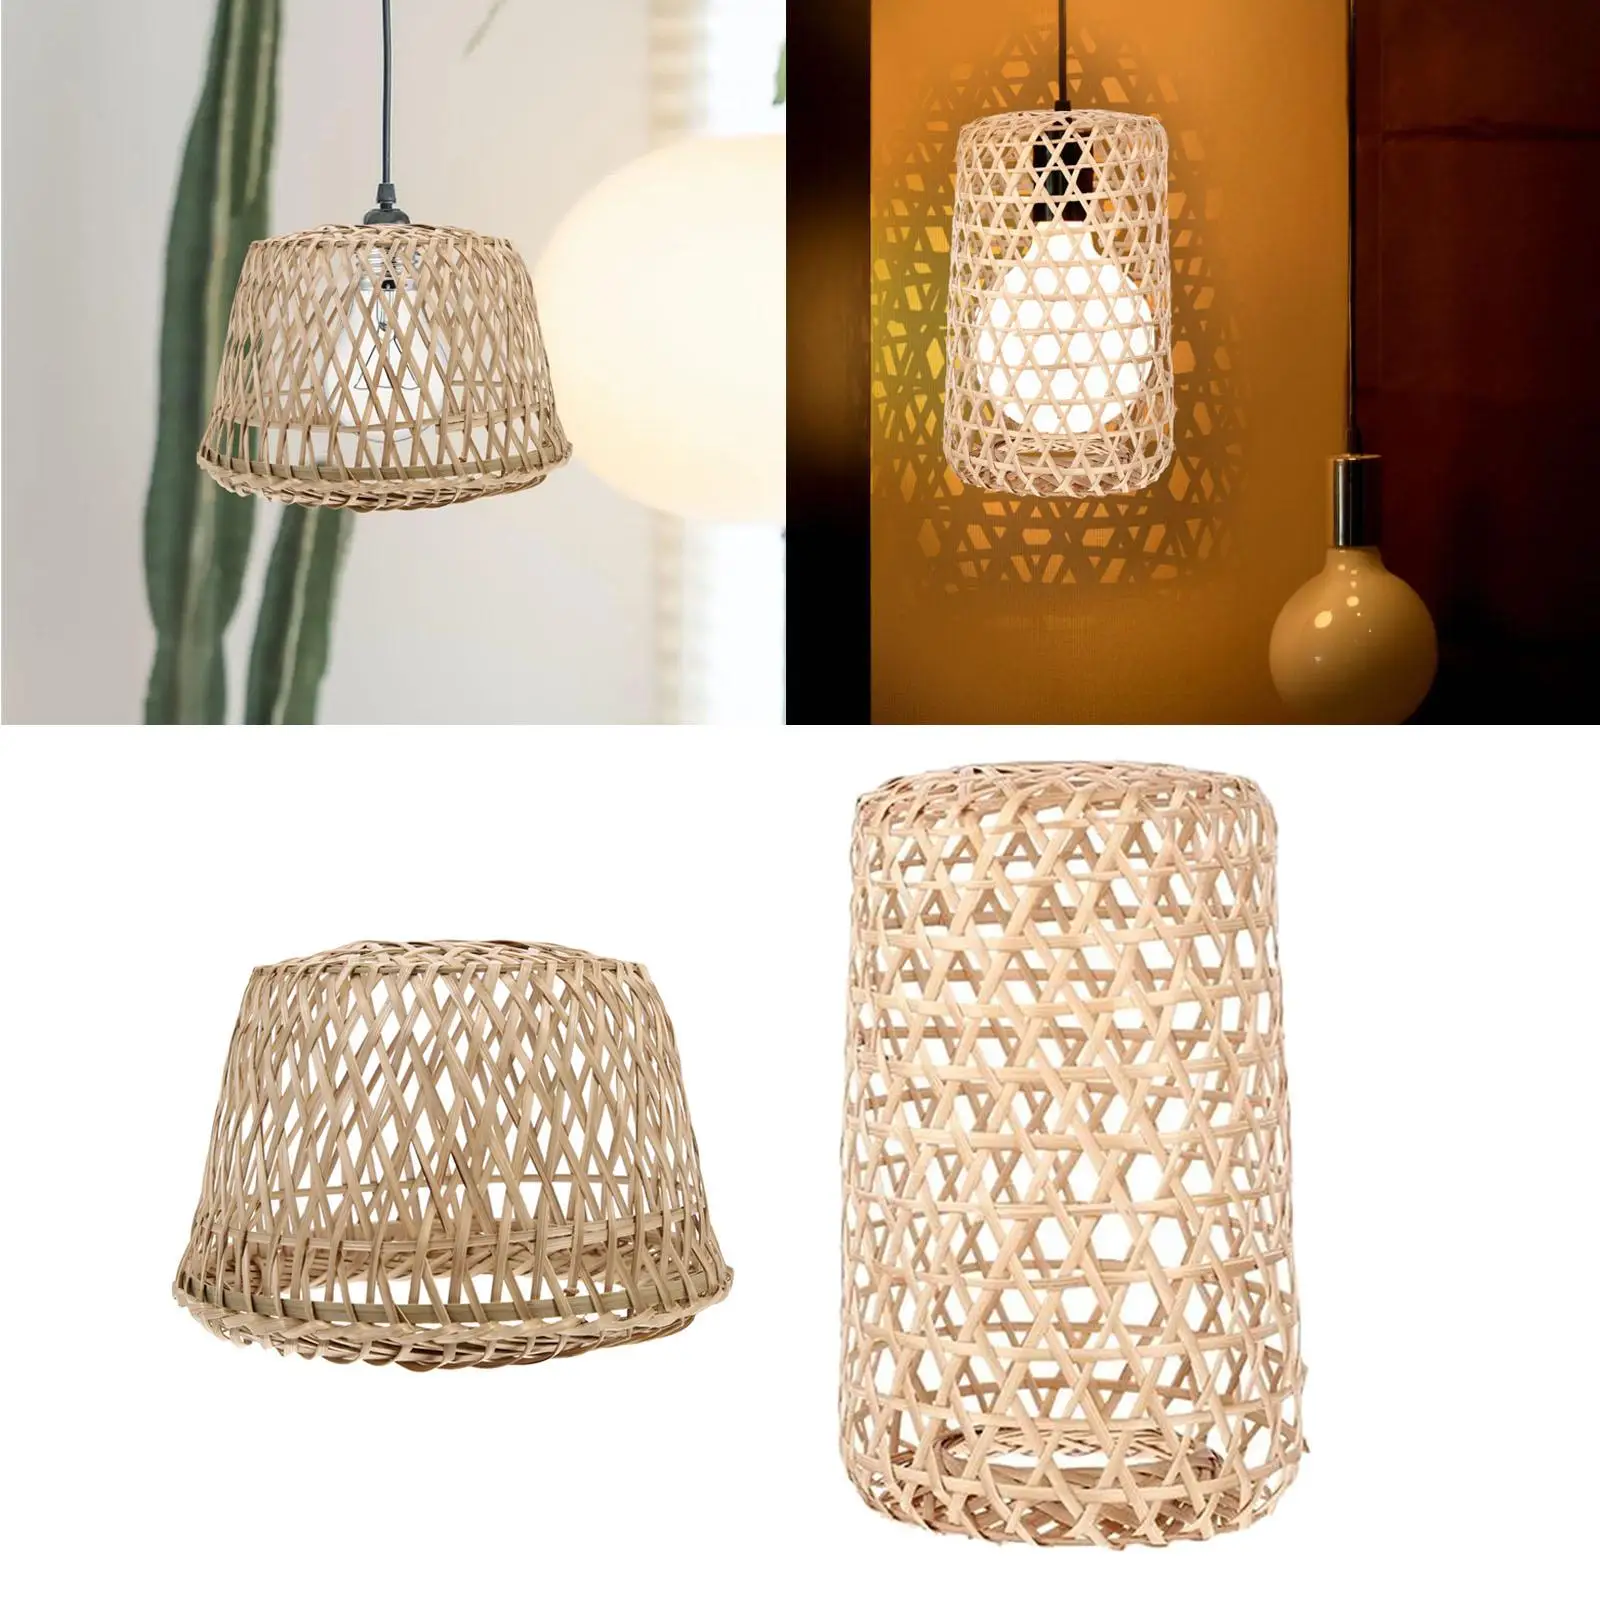 Handwoven Lampshade Ceiling Pendant Light Cover Retro Style Dustproof Chandelier Cover for Living Room Teahouse Kitchen Island